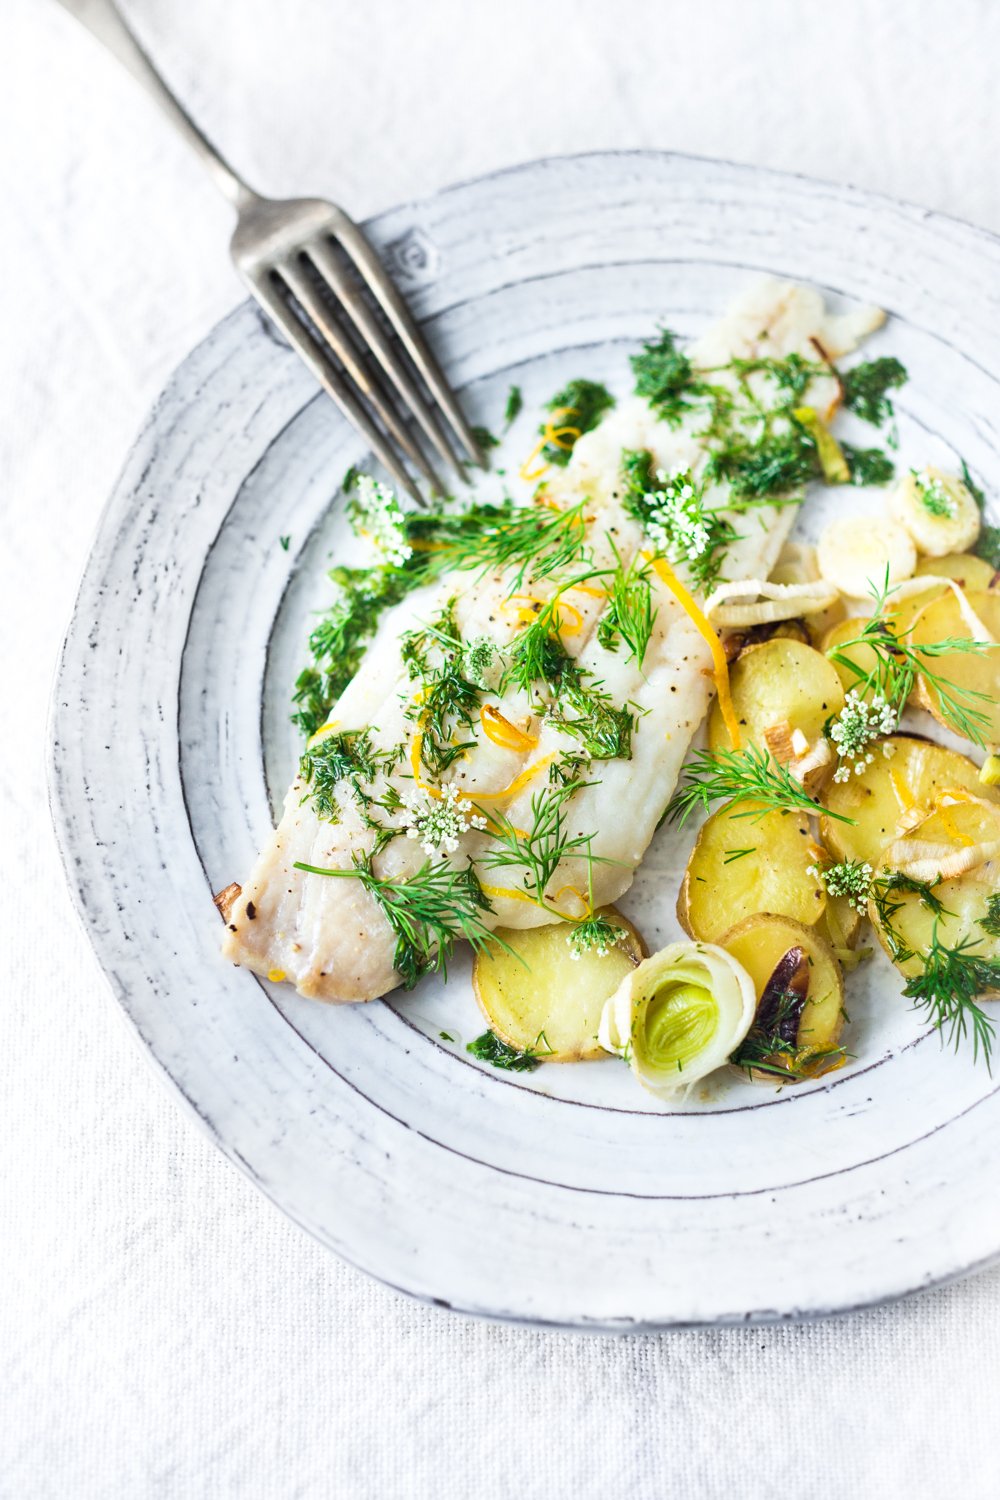 20 BEST FISH RECIPES | Feasting at Home: Sheet Pan Dover Sole with Potatoes, leeks, Lemon & Dill Oil- a simple healthy dinner that can be made in 25 minutes. #dill #sole #dillsauce #fishrecipe #healthyfish 